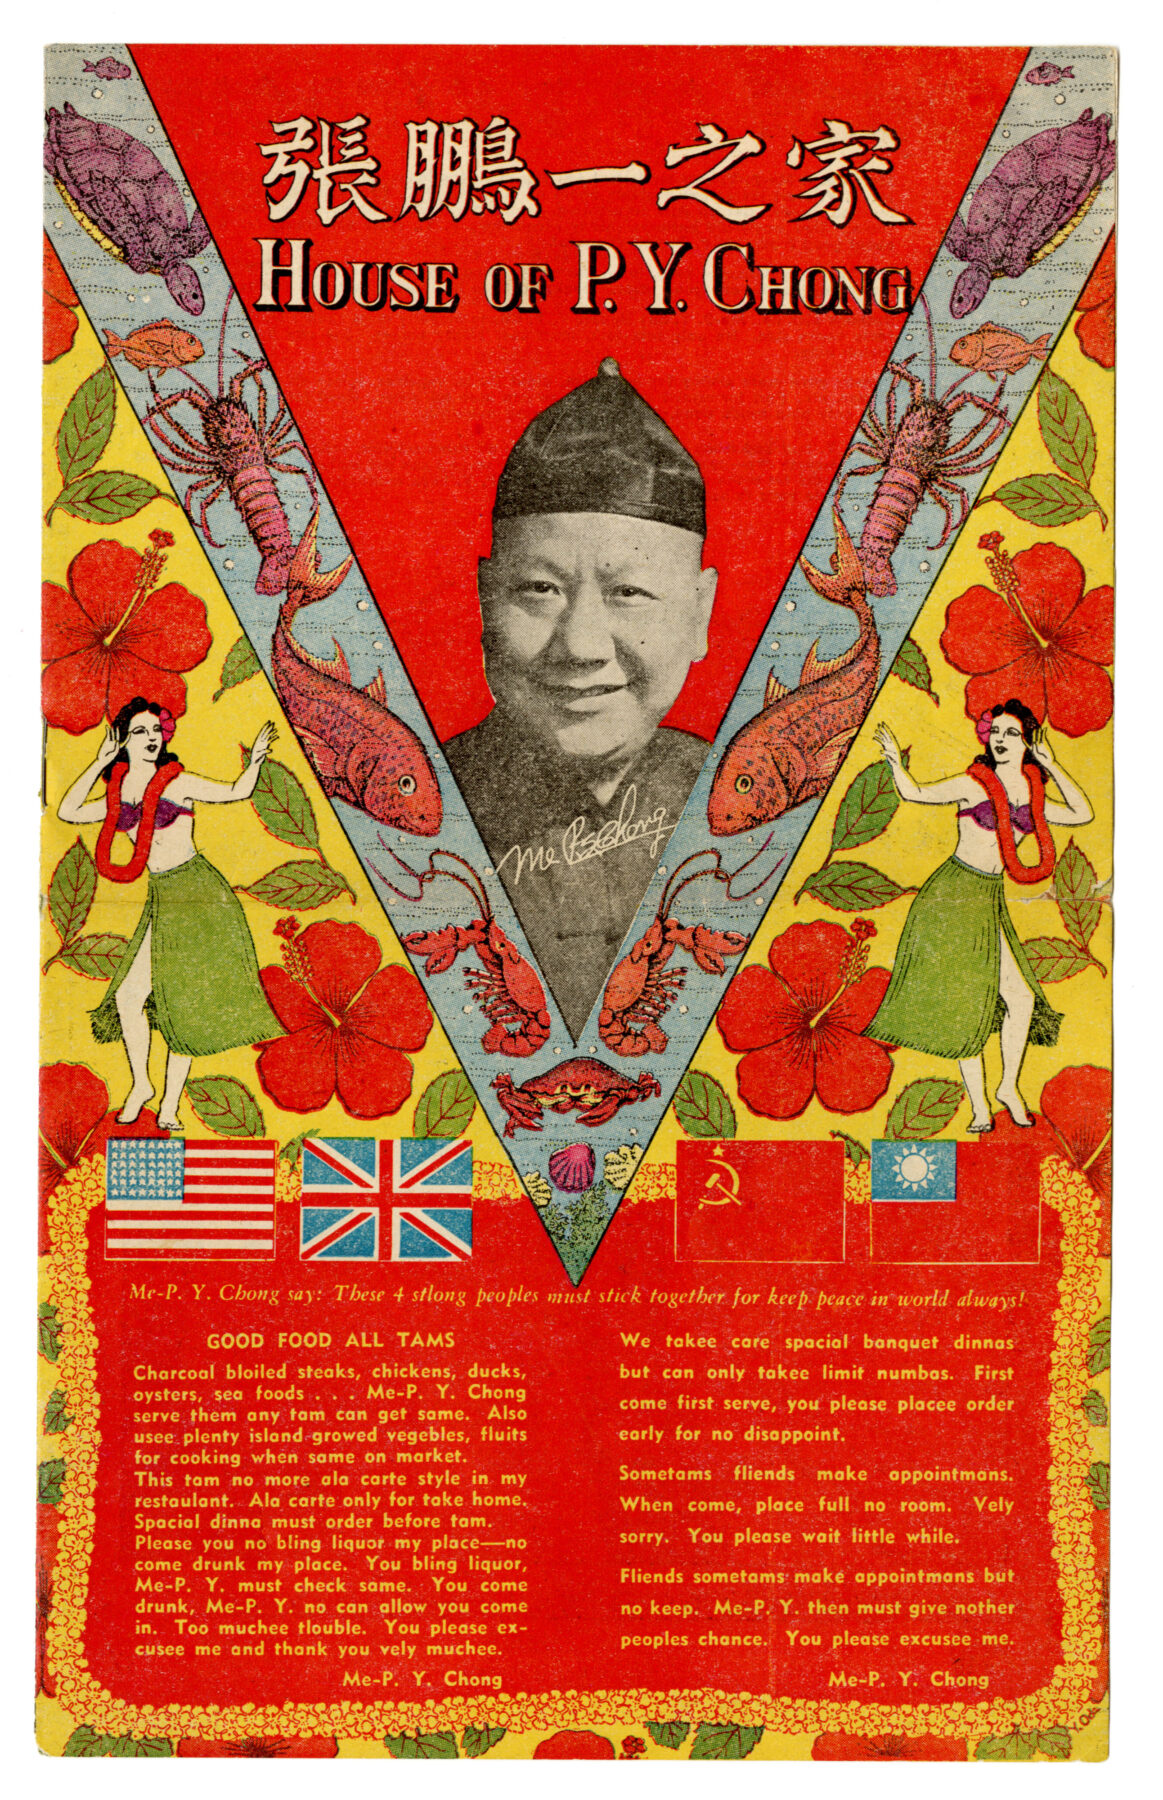 House of P.Y. Chong Restaurant Menu Front Cover. Courtesy of Roy Delbyck, Museum of Chinese in America (MOCA) Collection.